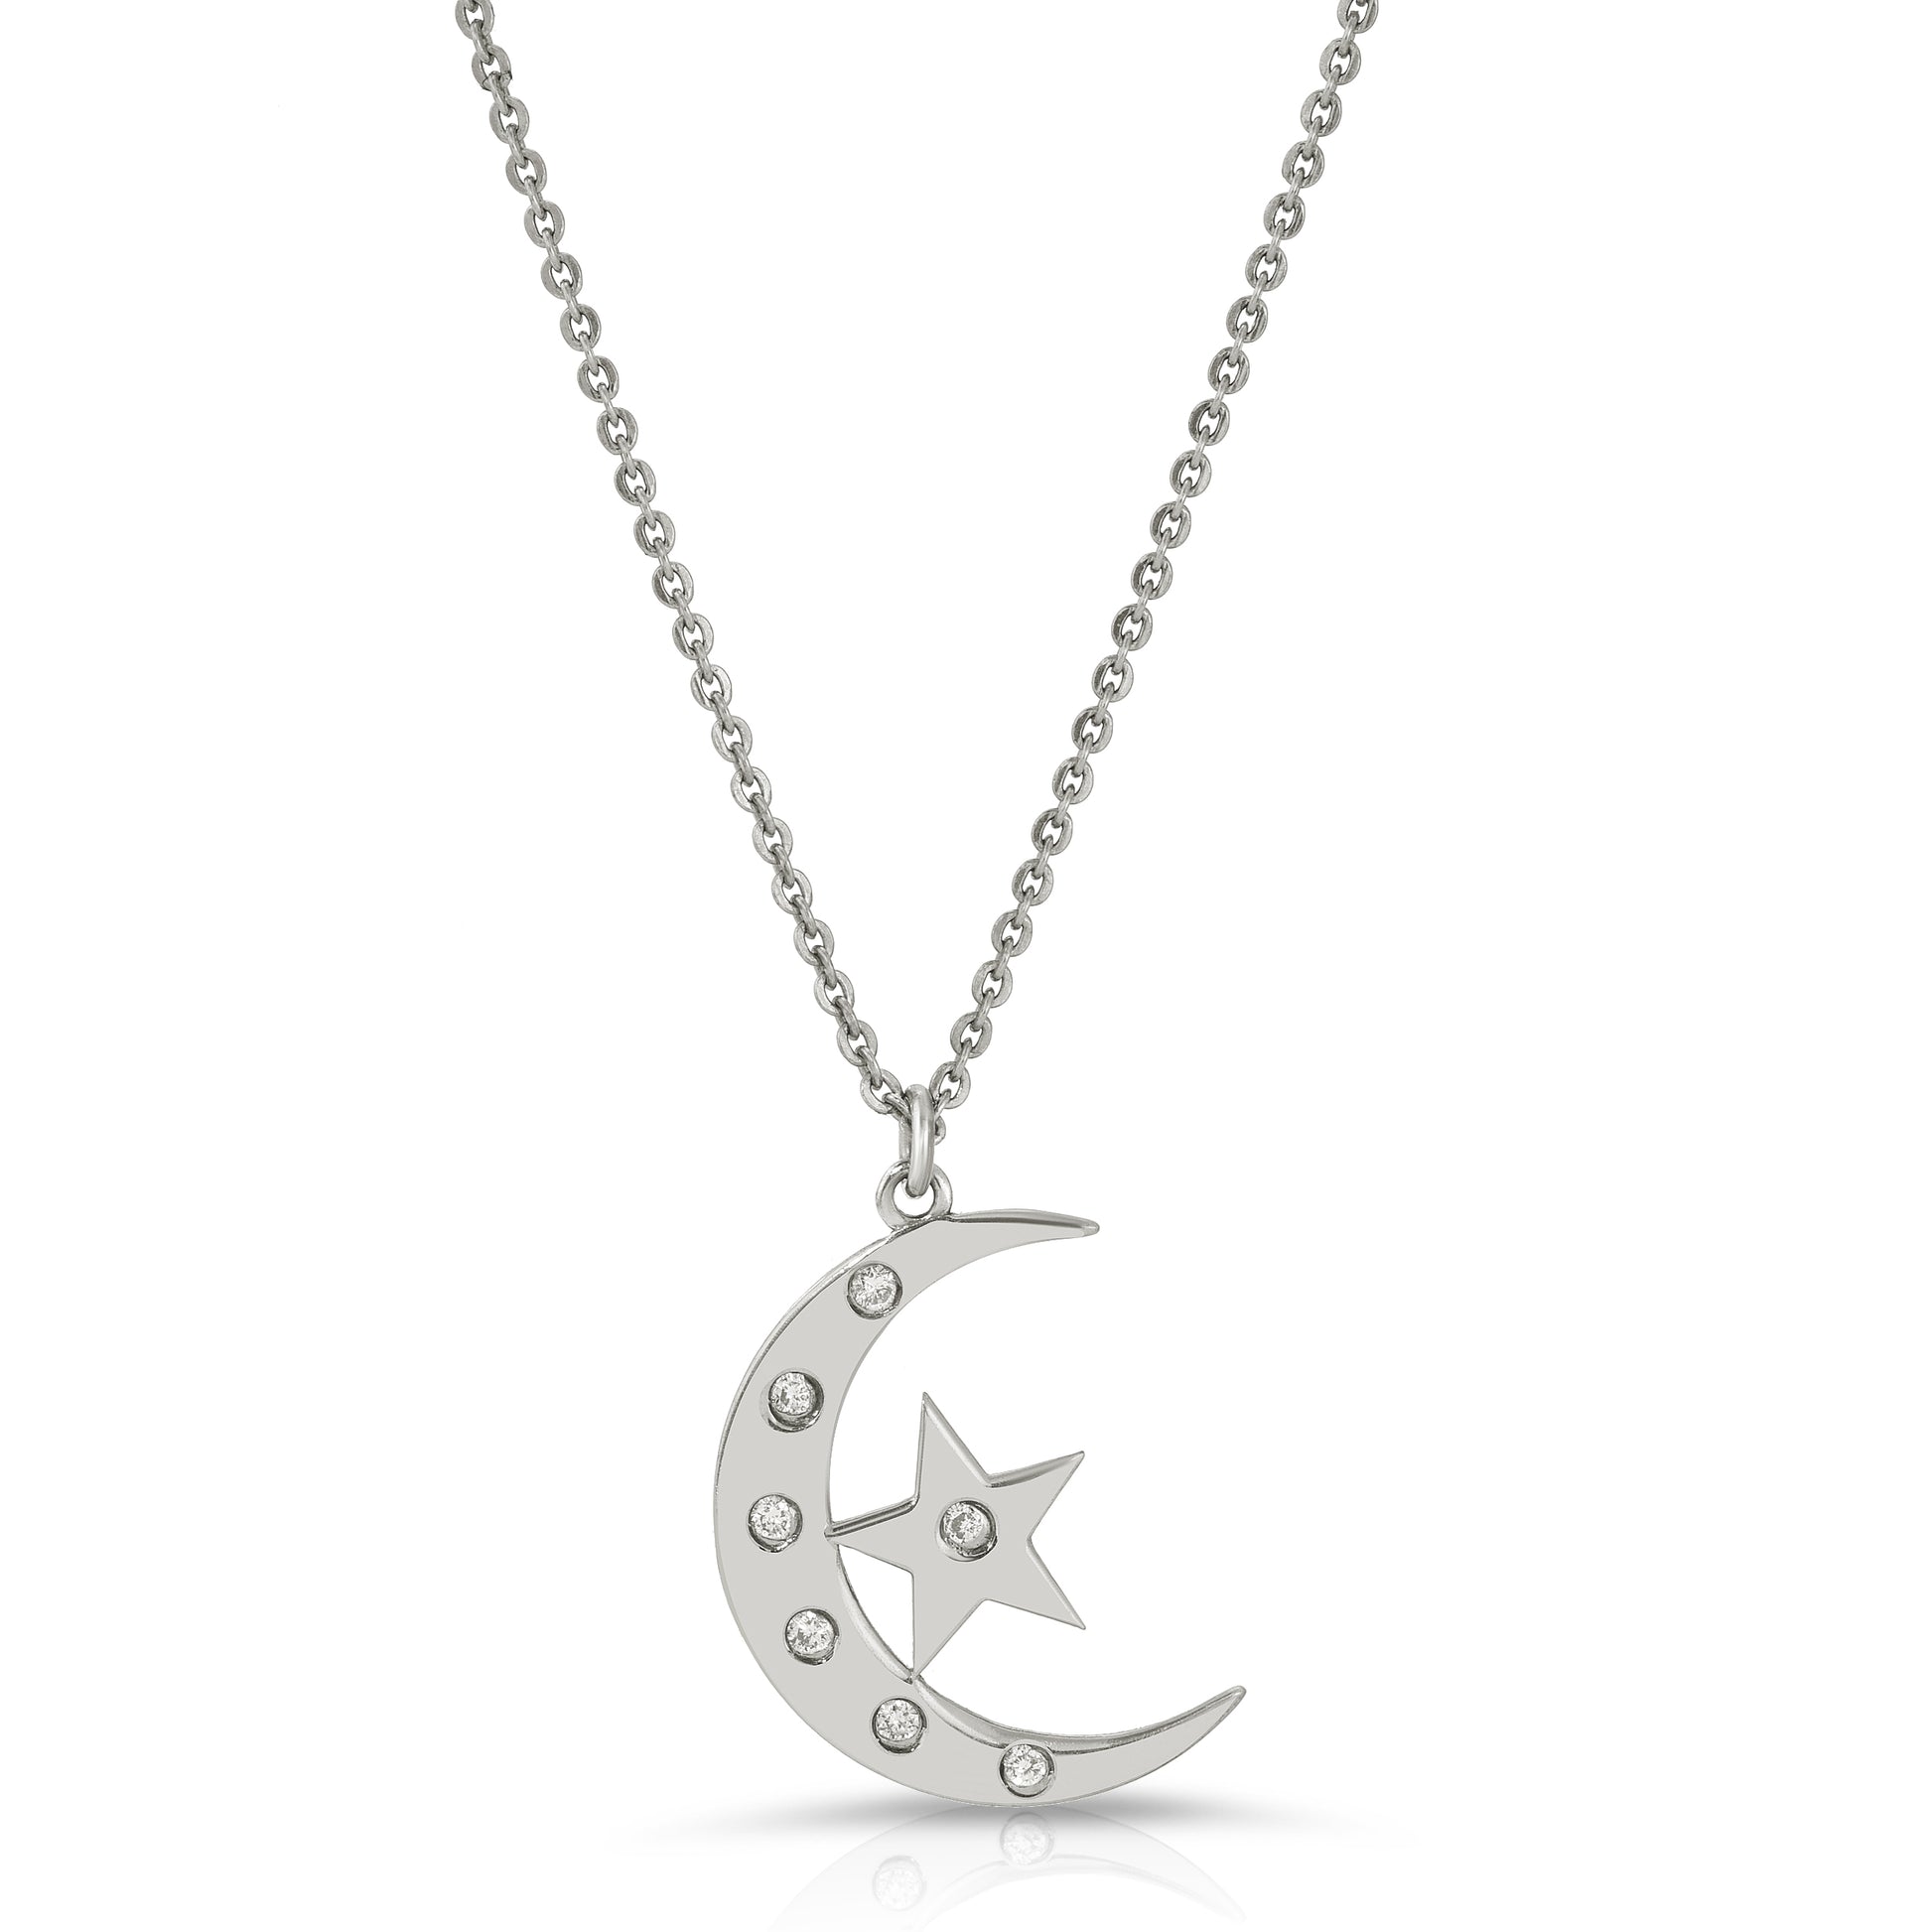 18K solid gold Moon and Star Pendant necklace with 7 diamonds